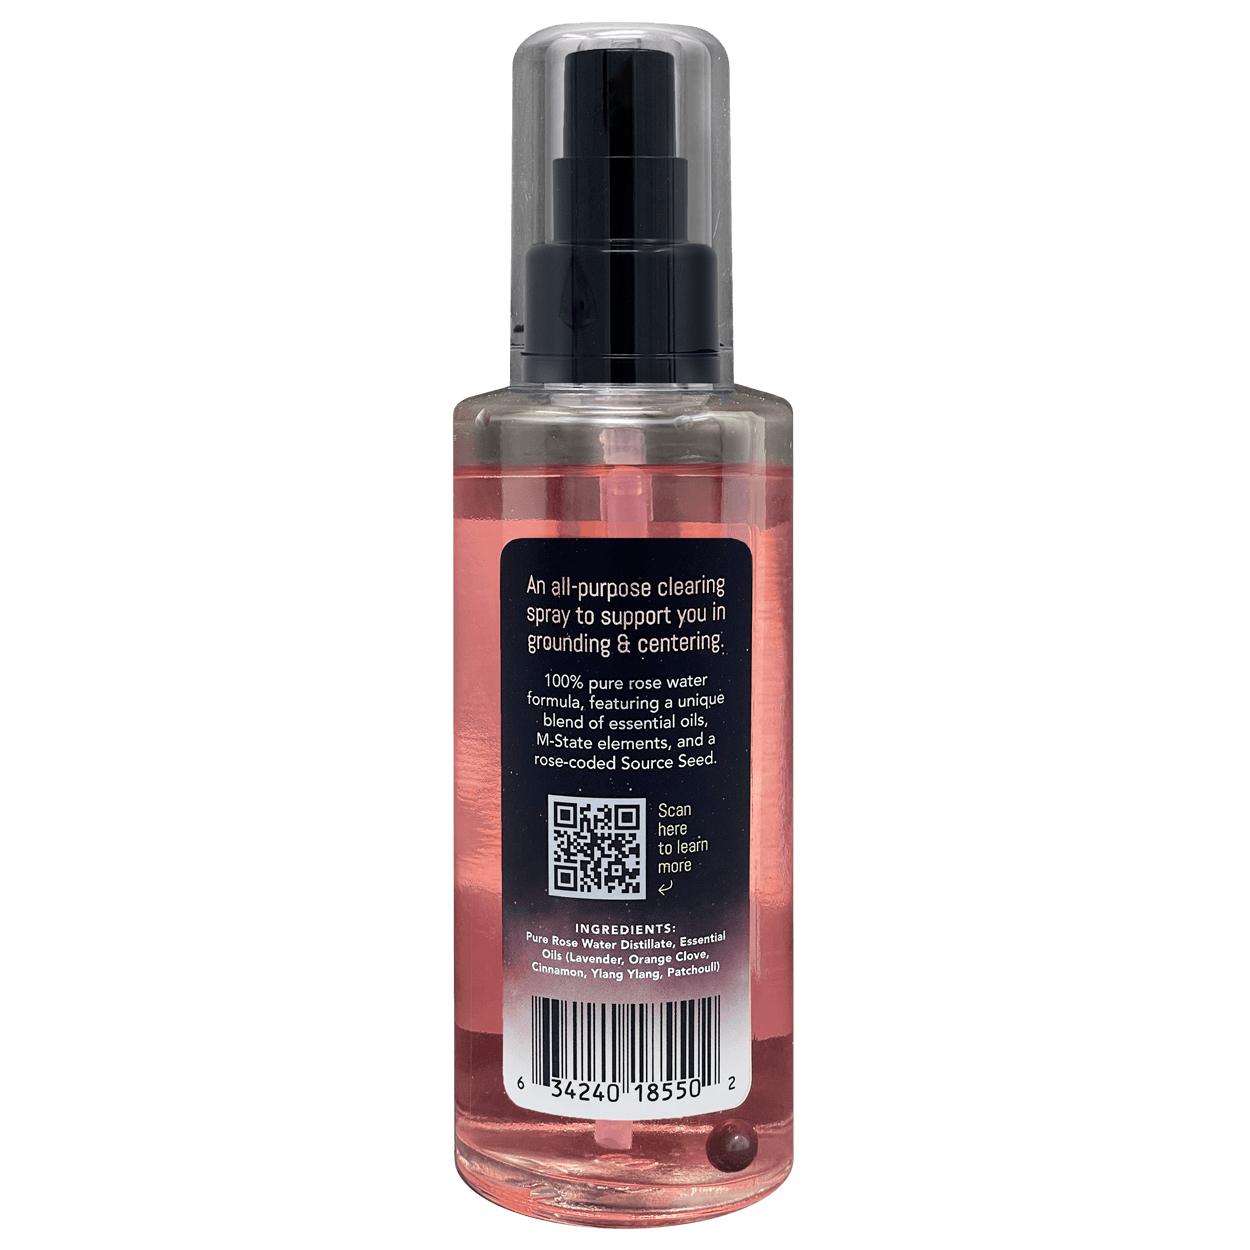 Clear Source Rosewater Spray - 4oz